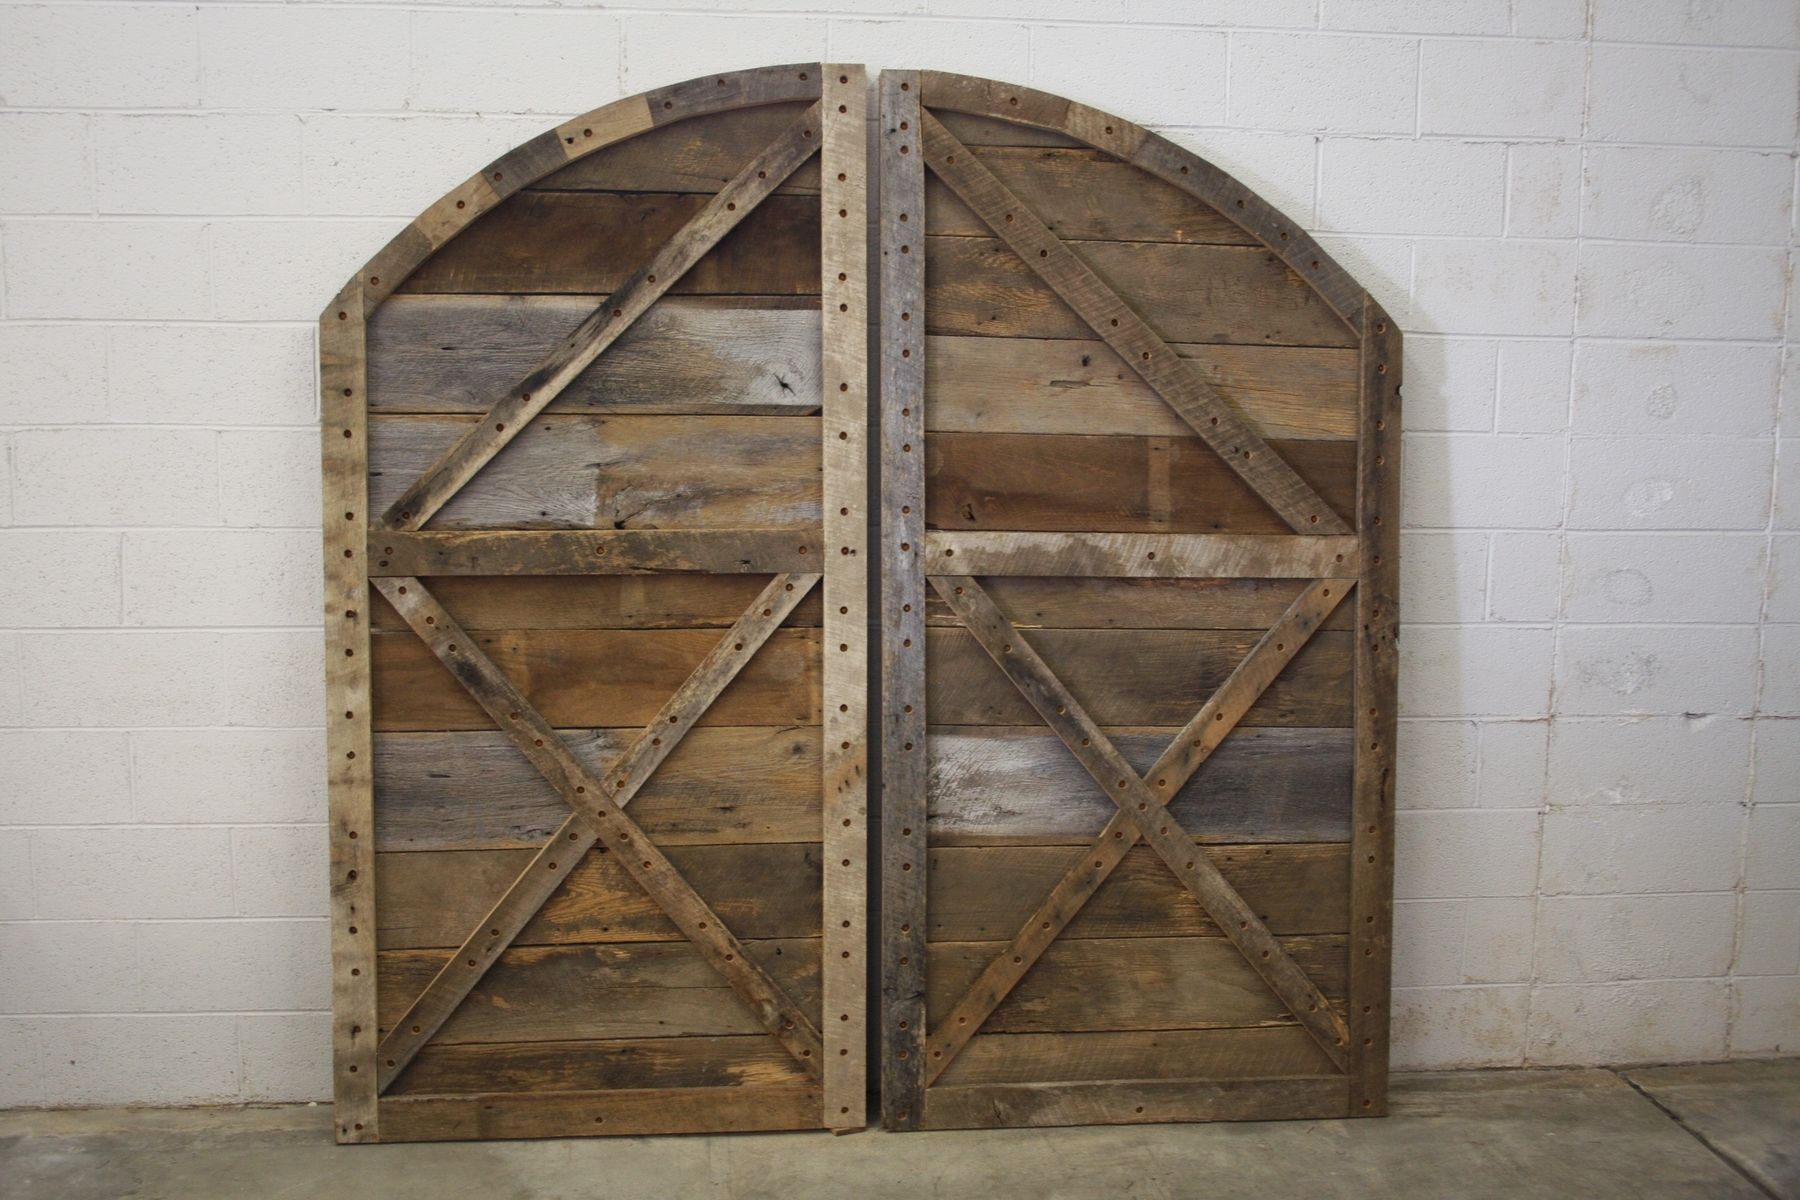 Buy Hand Crafted Arched Top Barn Doors Made To Order From